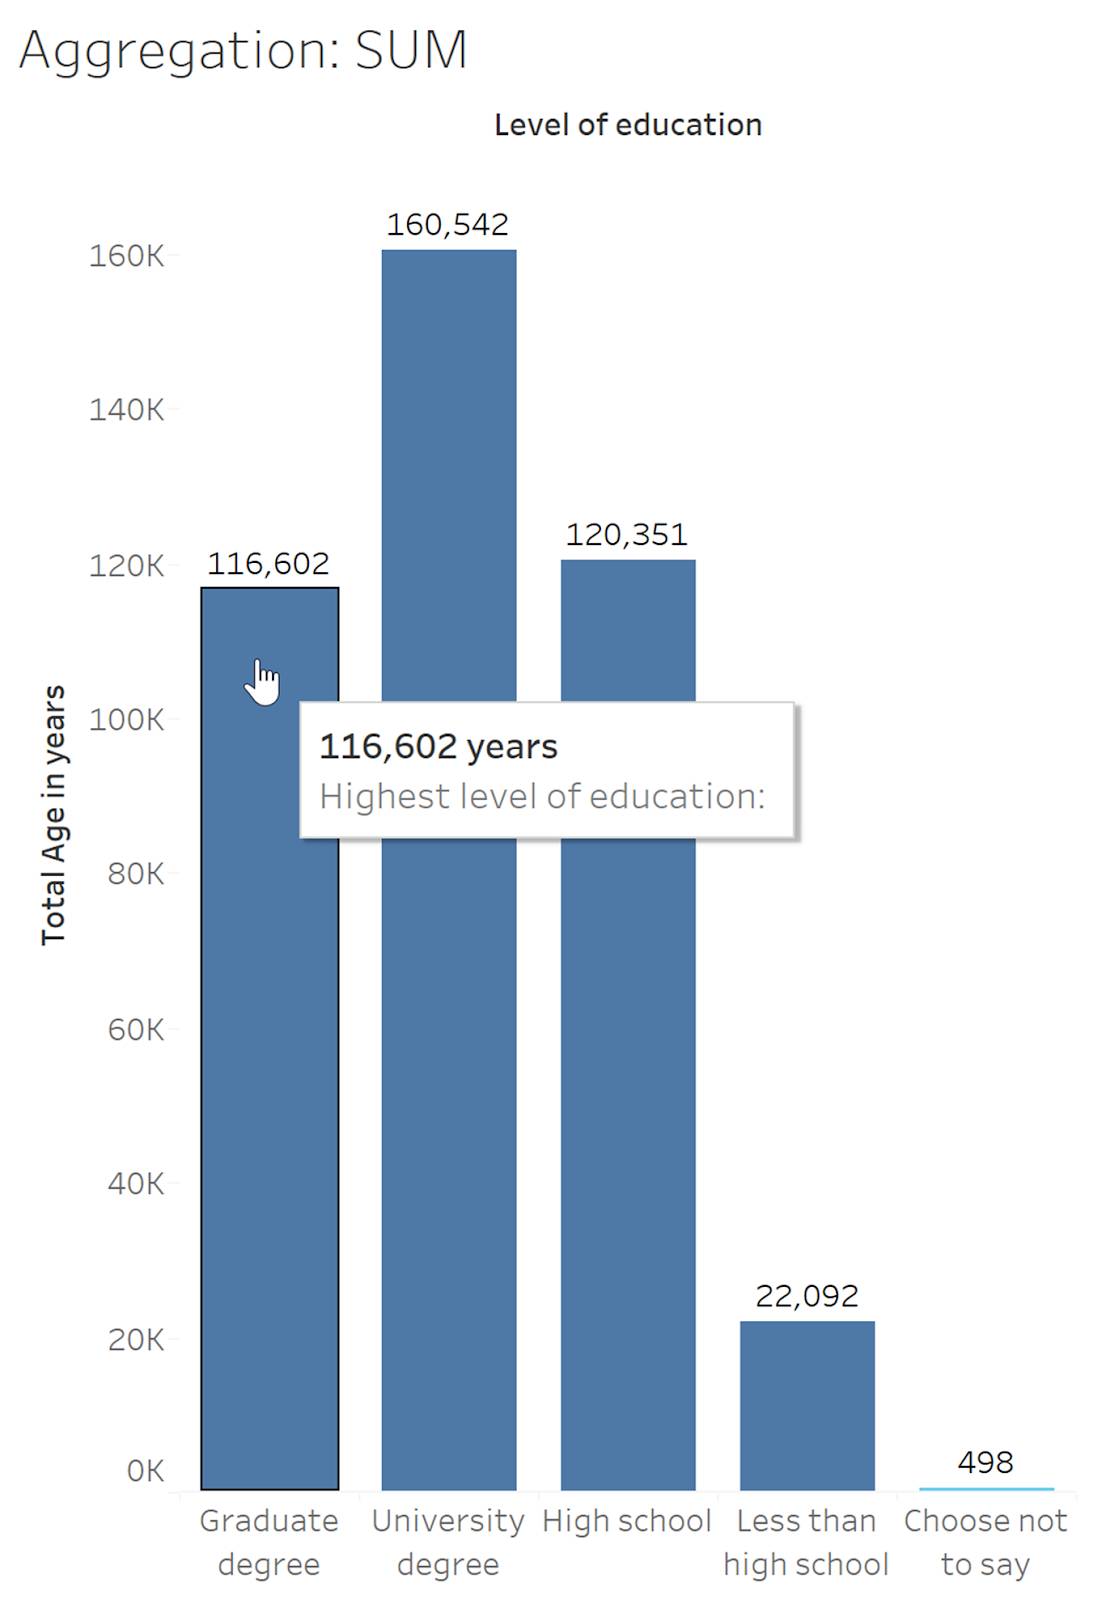 A bar chart showing the Age quantitative variable sum on the y-axis and five levels of education on the x-axis, and a callout showing a sum aggregation of 116,602 years for the highest level of education.